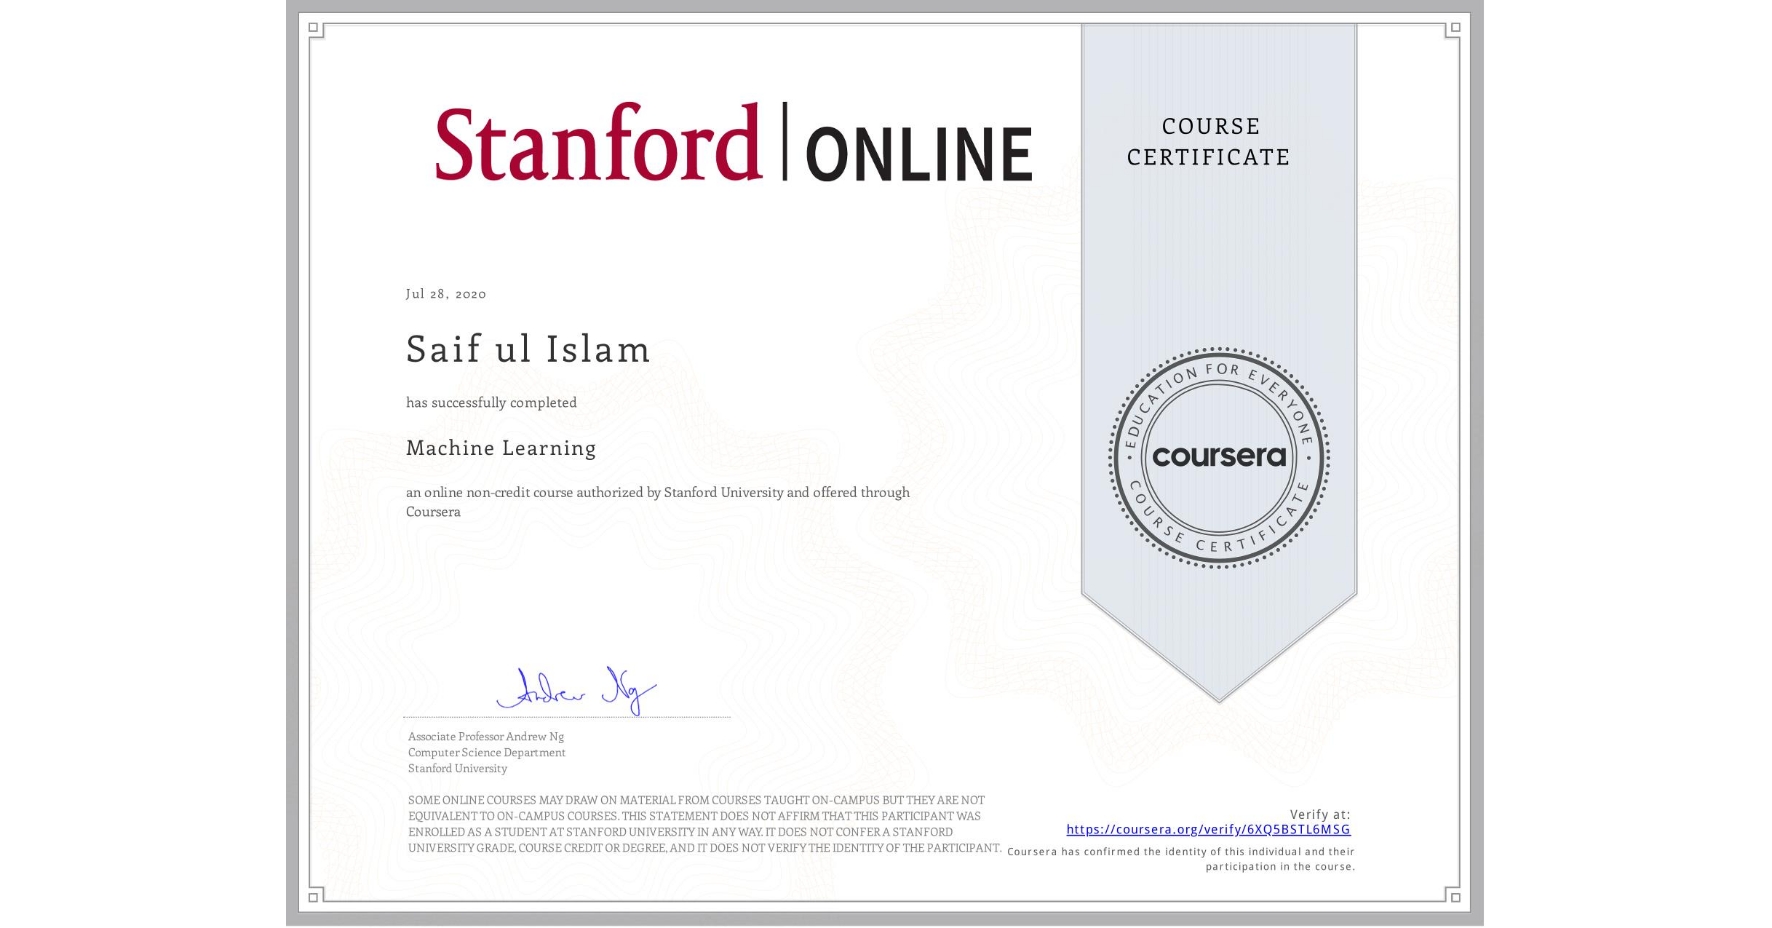 Machine Learning @ Stanford Online